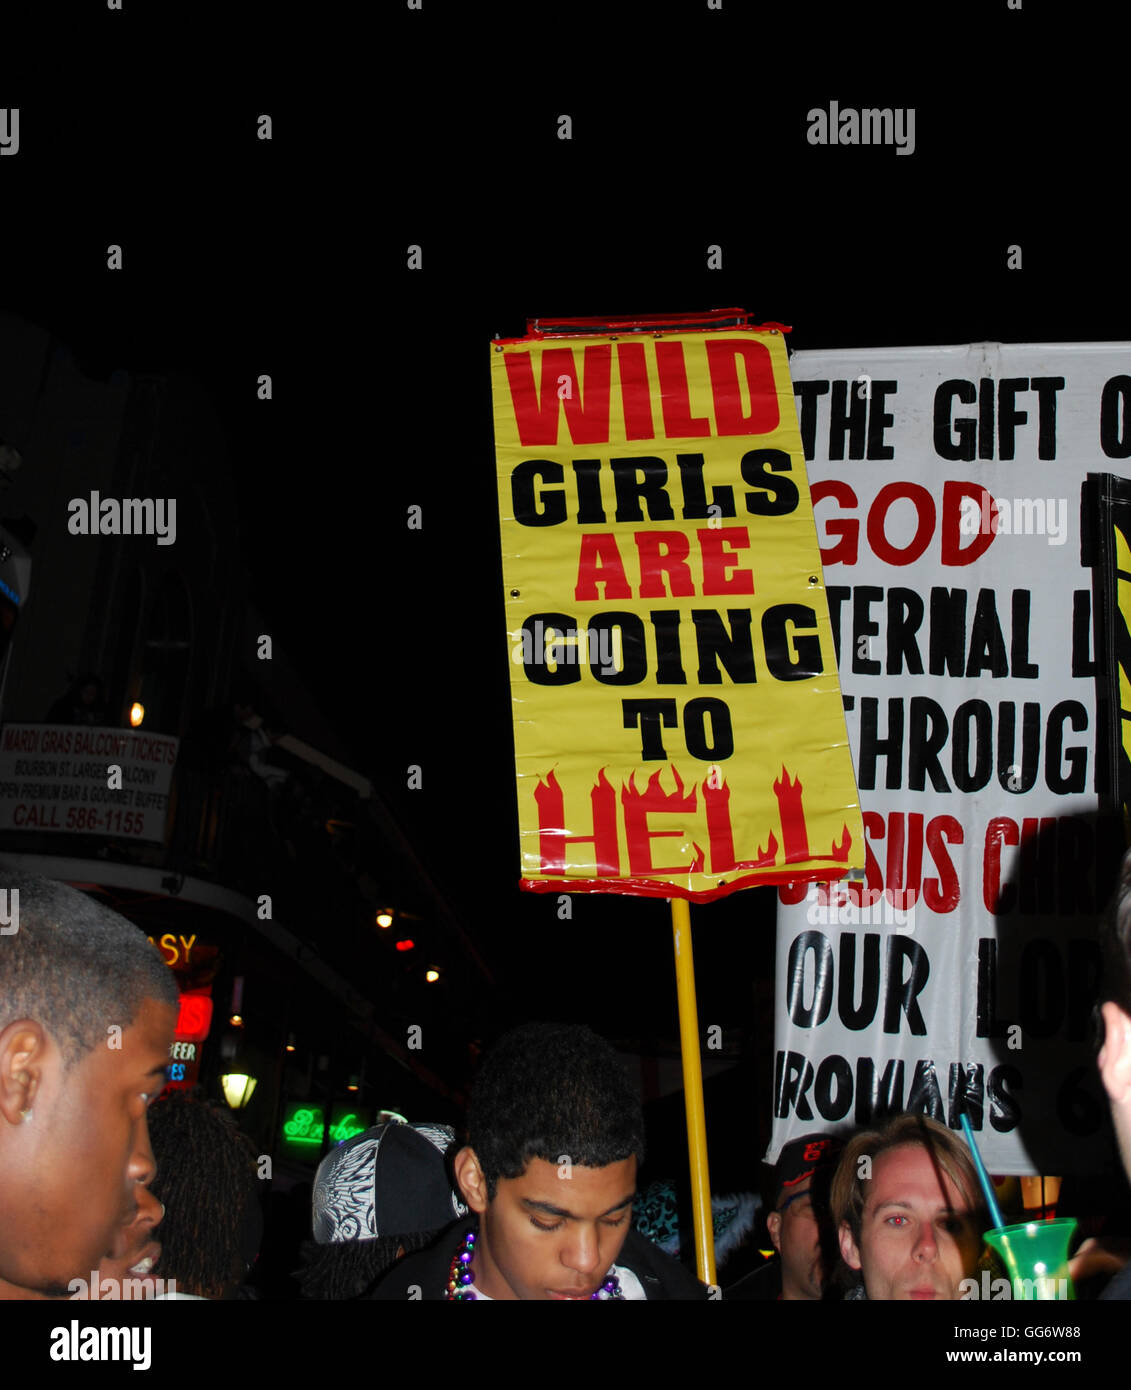 Protesters on Bourbon Street warning revelers about Gods judgment during Mardi Gras New Orleans Louisiana Stock Photo